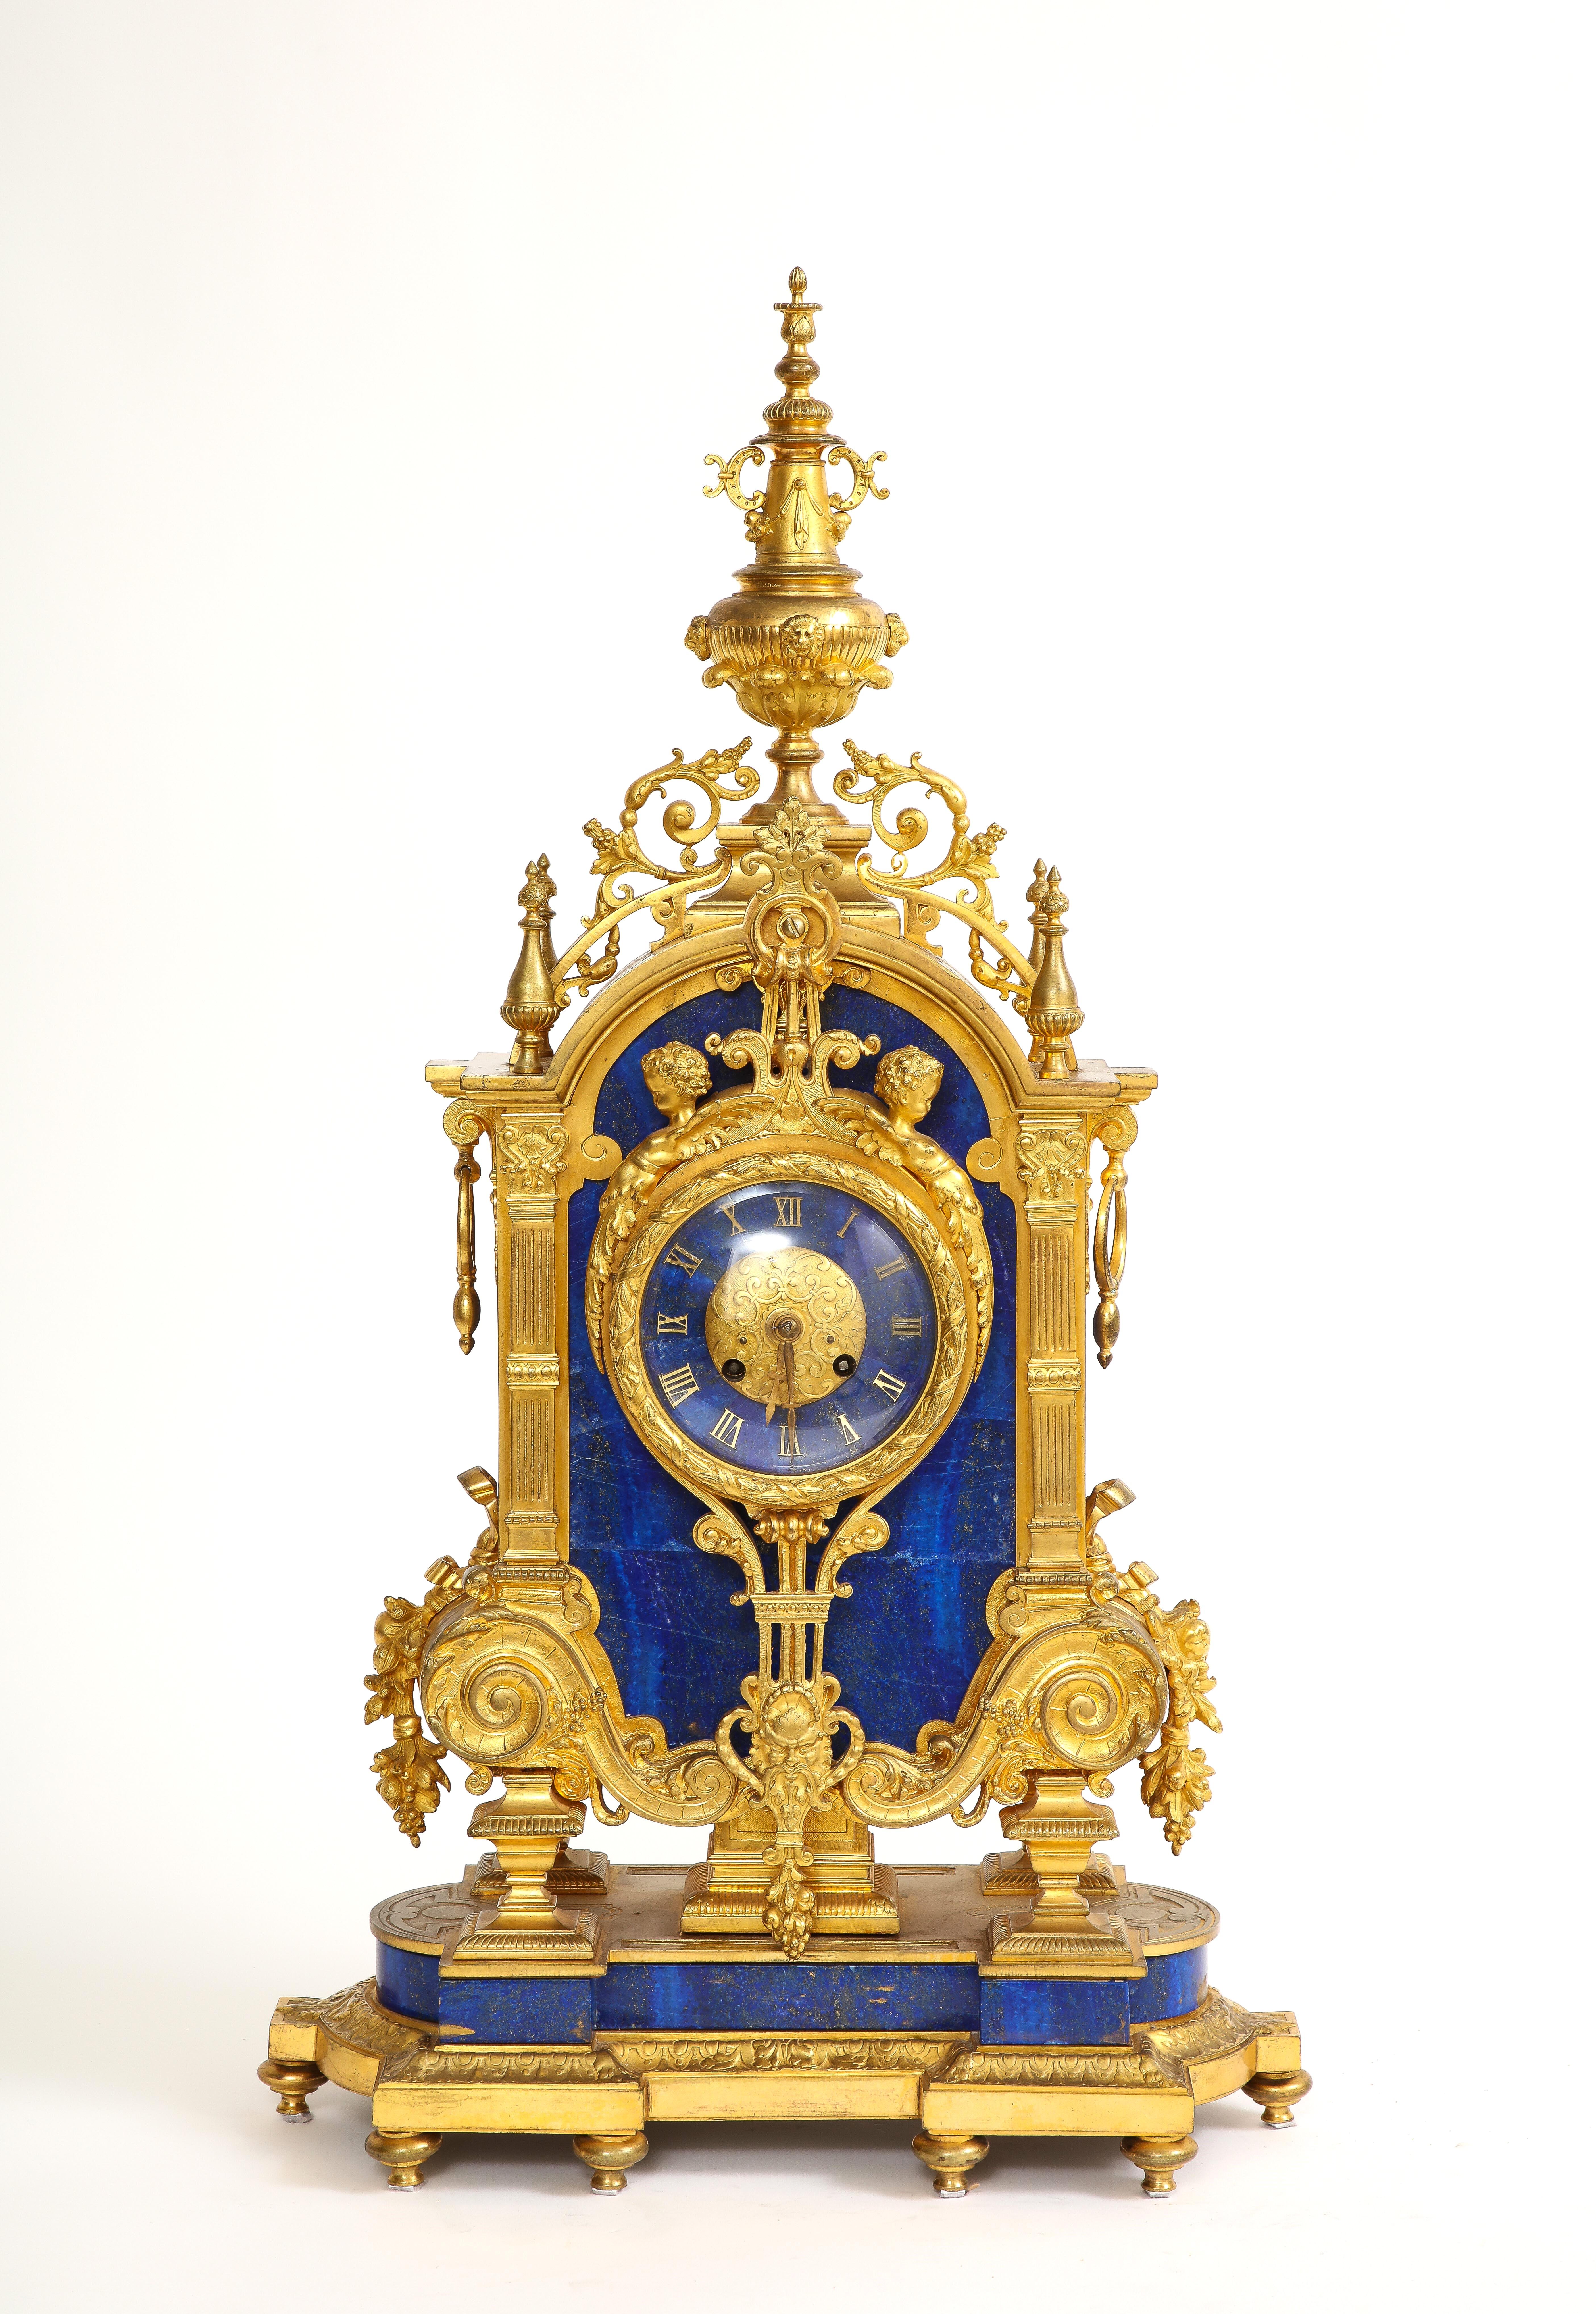 An Incredible and Quite Rare 19th century French Lapis Lazuli Louis XVI Style Ormolu clock. This is a stunning piece of decorative art that reflects the luxurious tastes of the 18th century French monarchy. The clock features a Classic French design